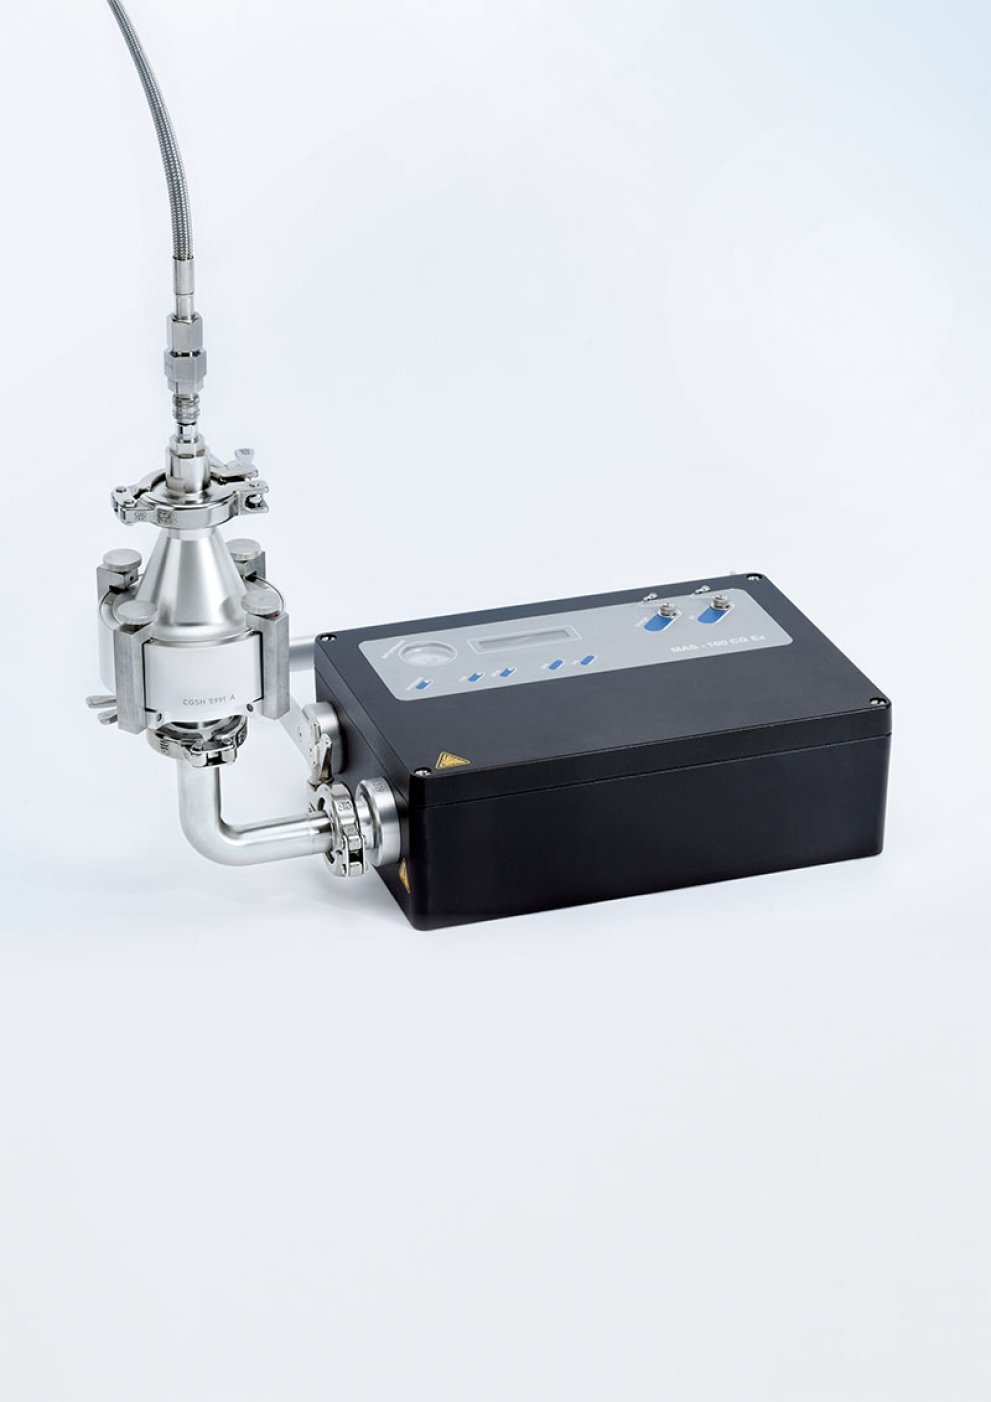 The MAS-100 CG Ex microbial sampler to check compressed gas lines for microbial contamination.